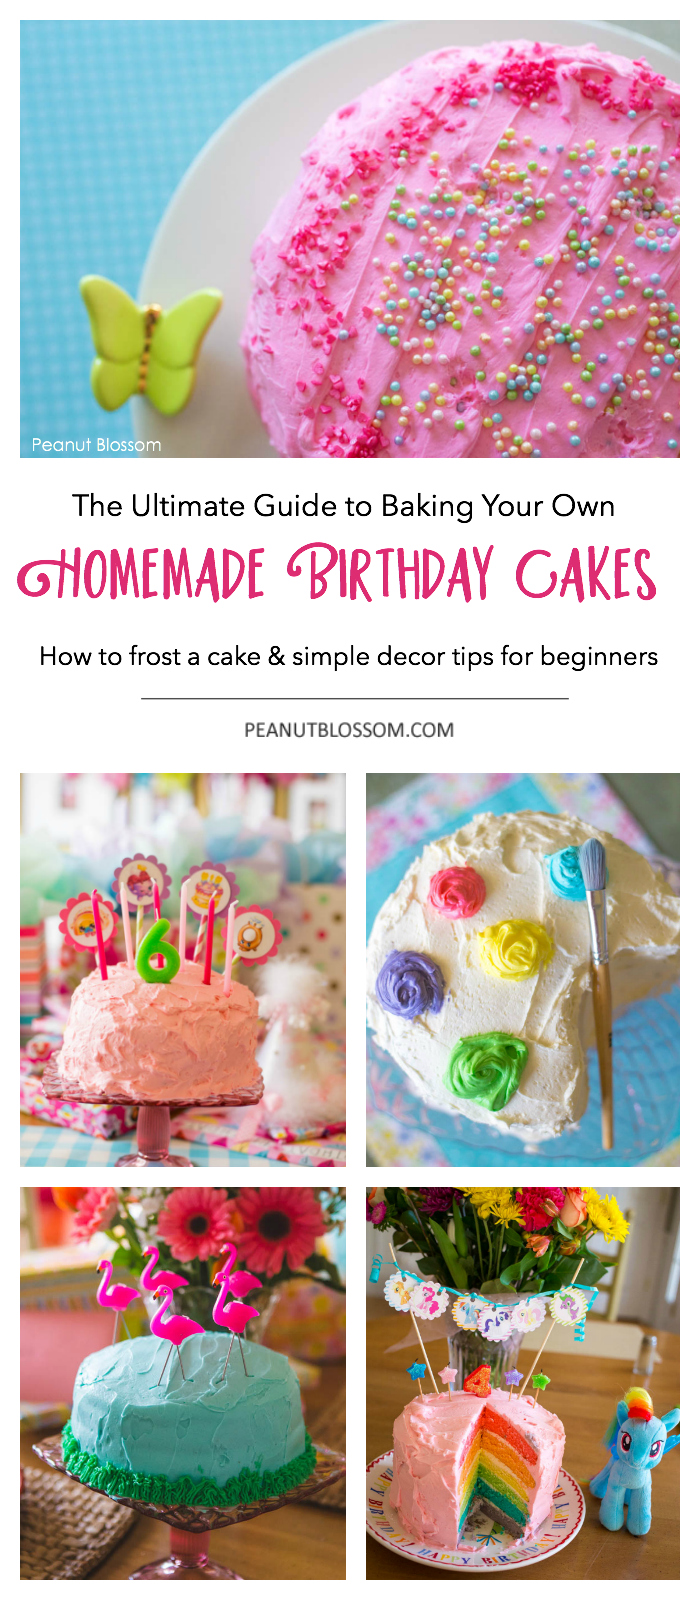 The Ultimate Guide to Homemade Birthday Cake: How to frost a birthday cake and simple decoration tips for beginners.